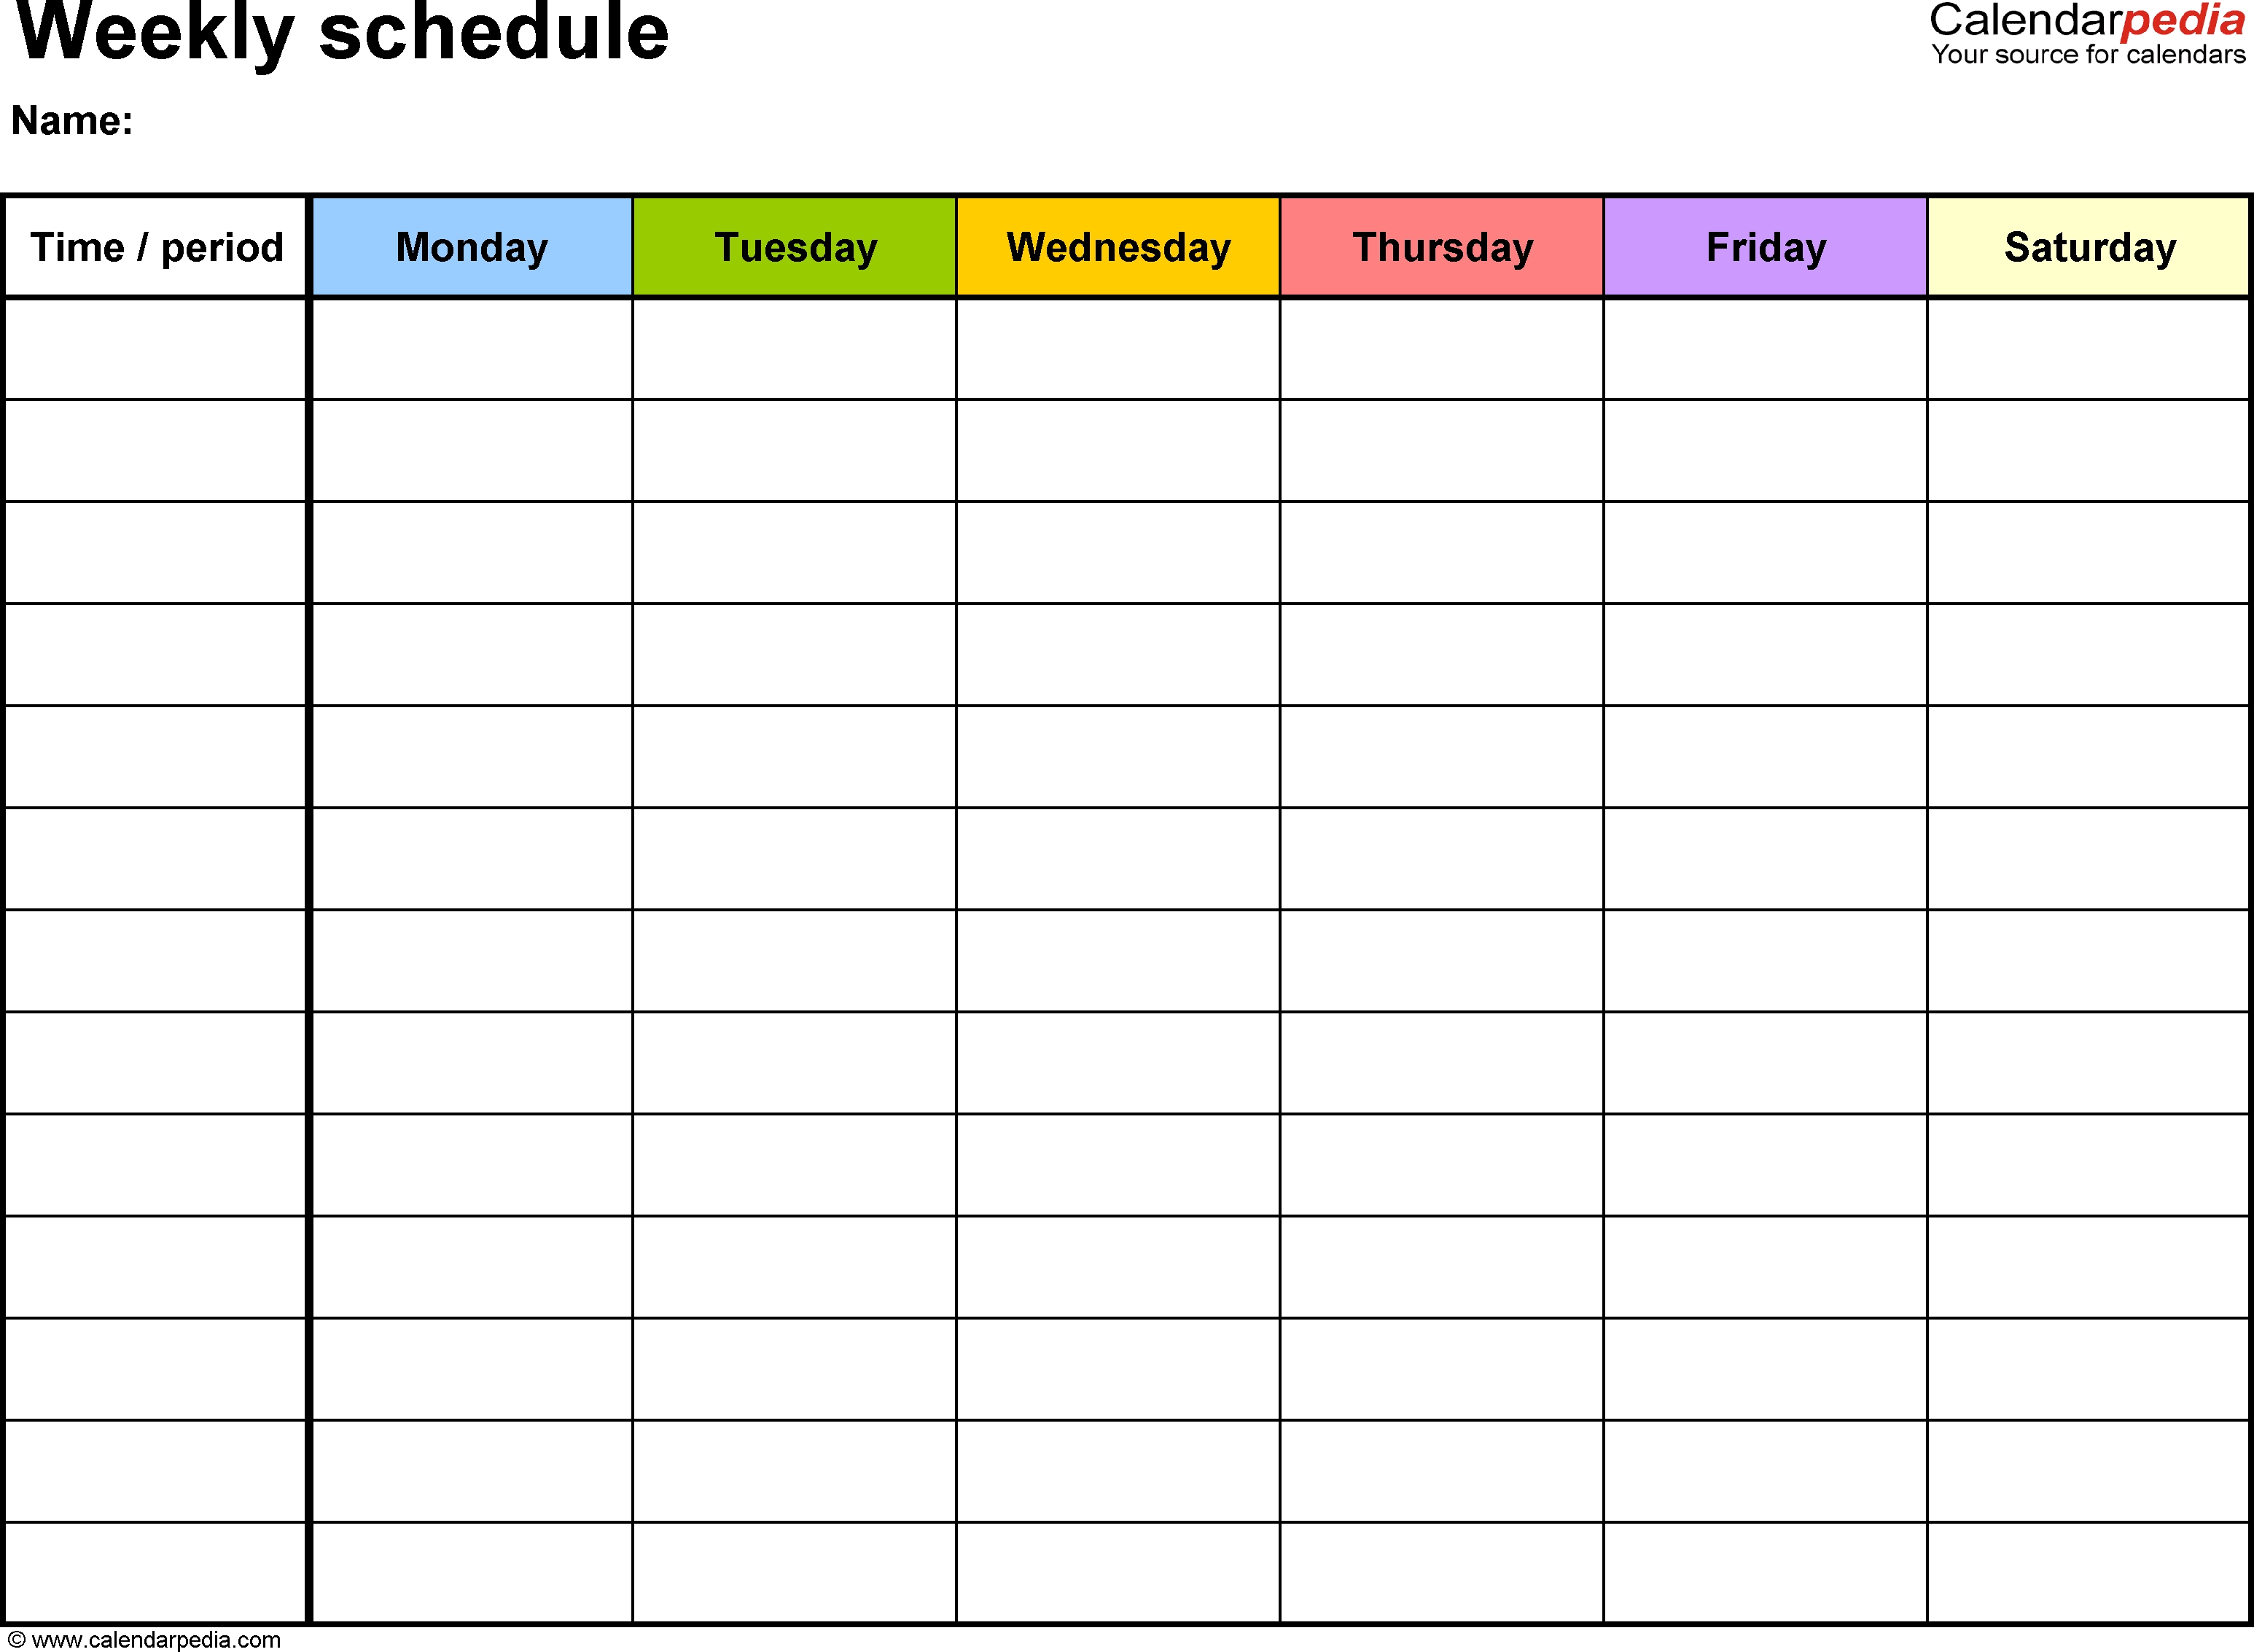 Free Weekly Schedule Templates For Word - 18 Templates-Blank Monday Through Friday Calendar